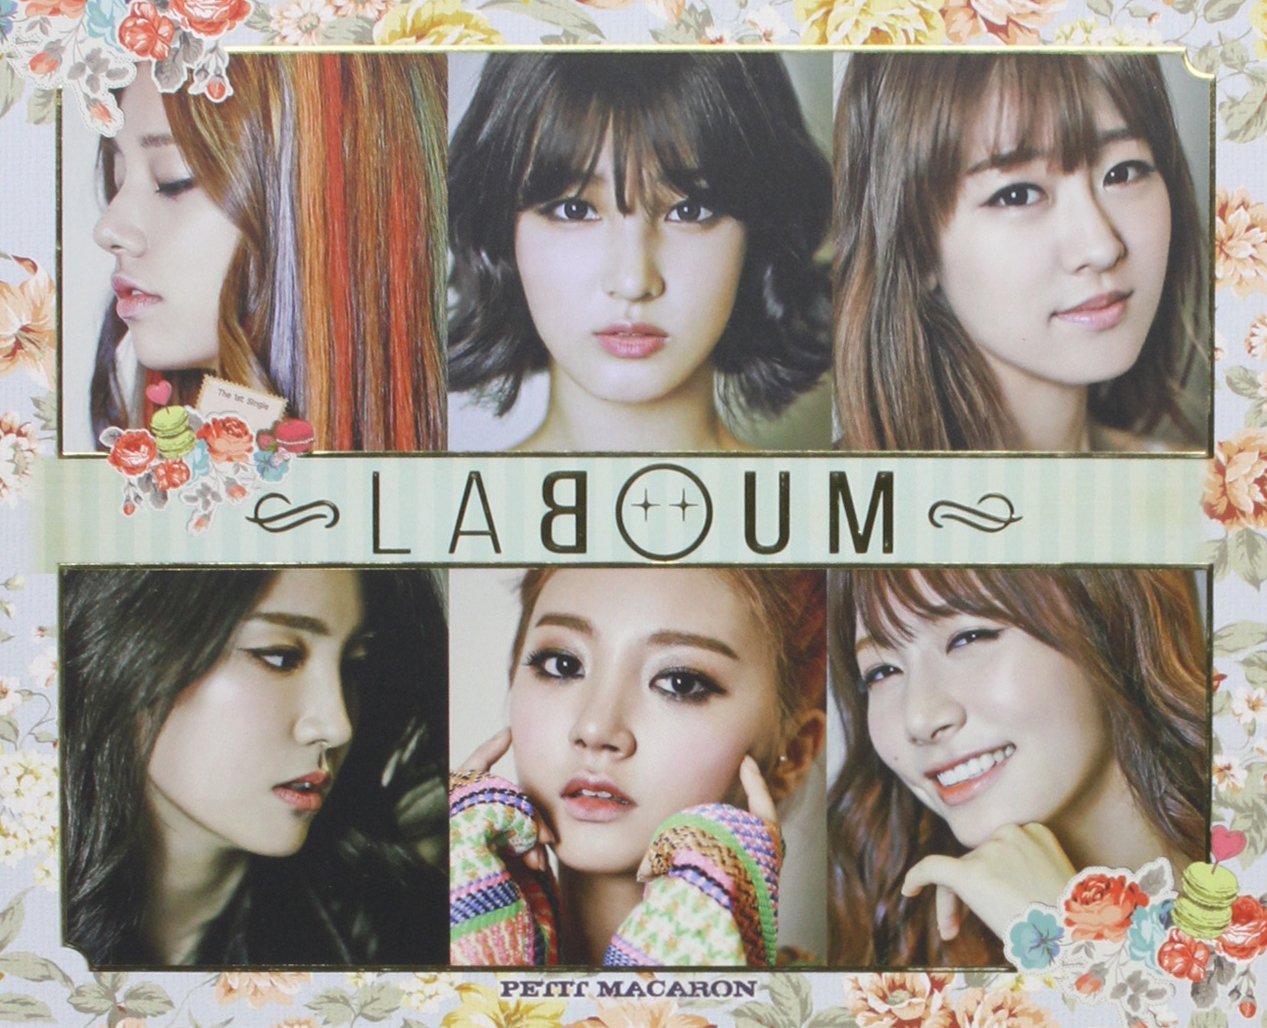 The Ultimate Laboum Profile 2016 - OH MY KPOP!